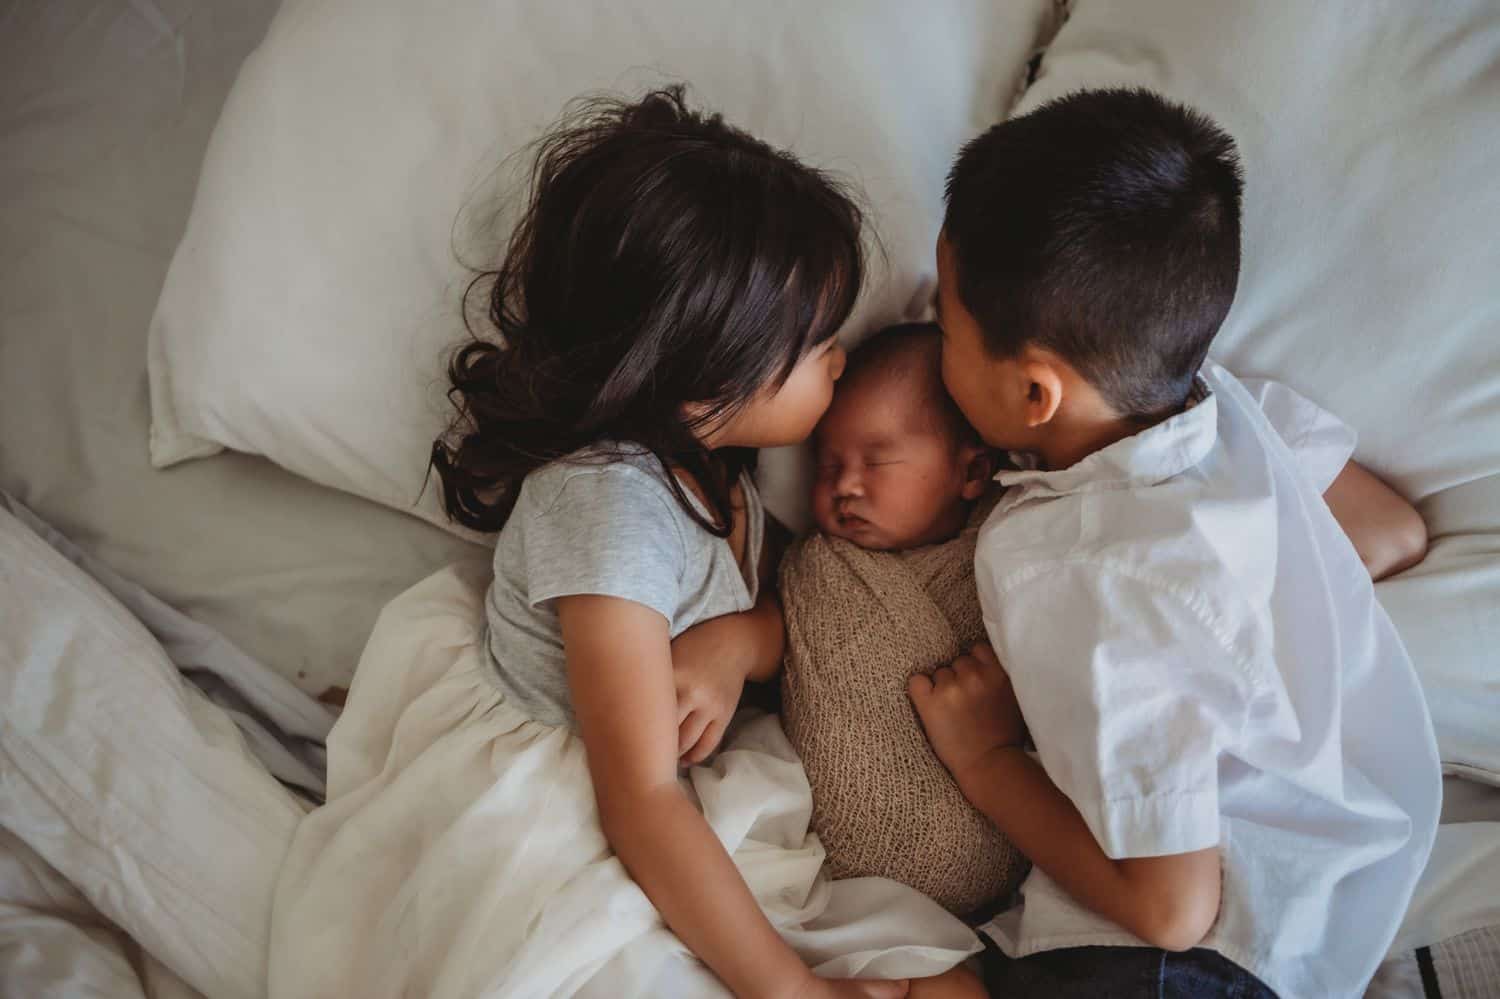 Three children lie together in a bed with ivory linens. The toddler brother and sister kiss their infant sibling on the head.